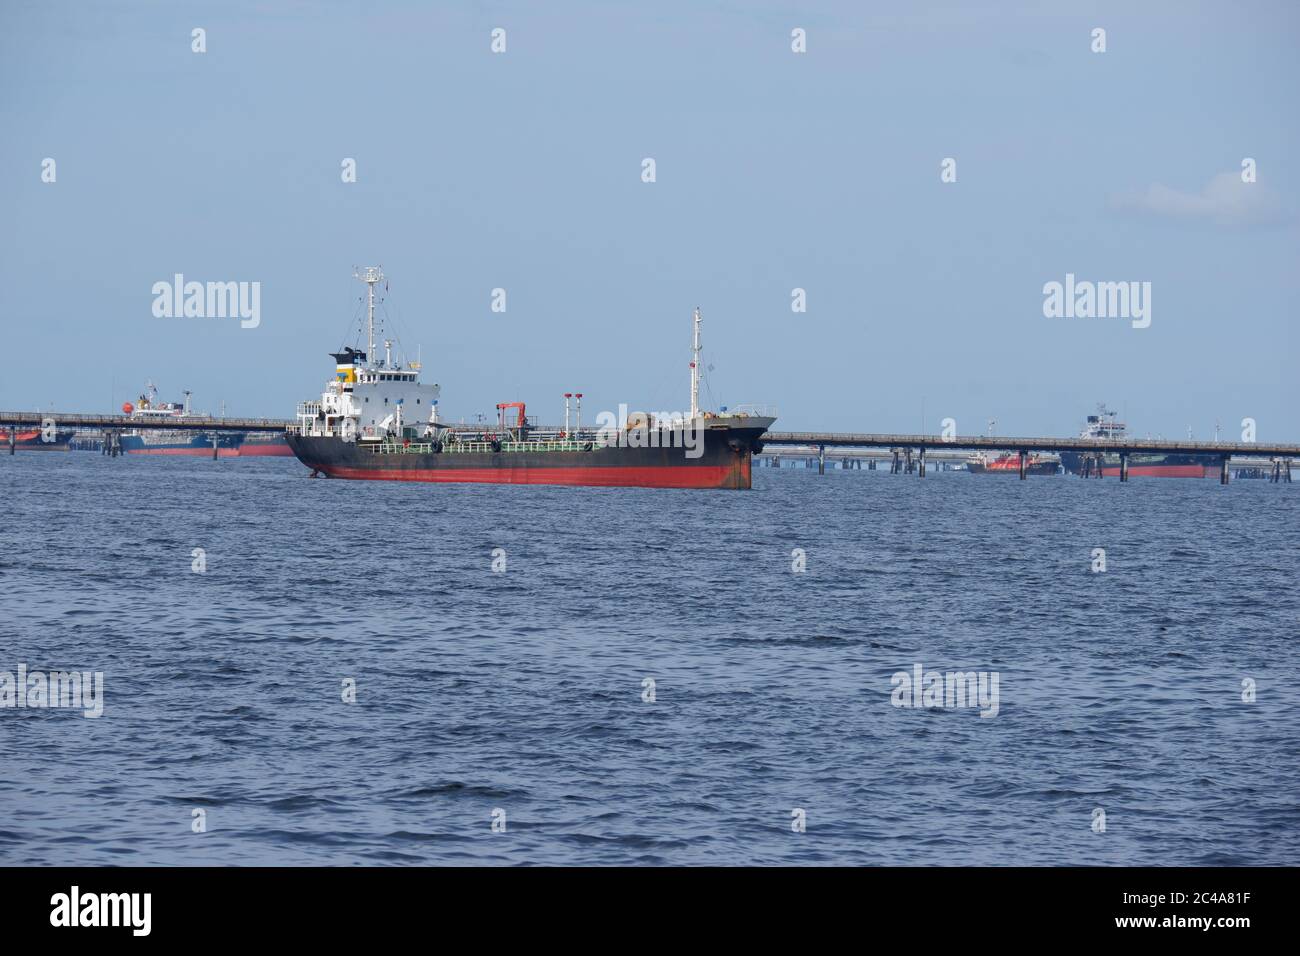 The oil tanker in the back is the harbor crane Stock Photo